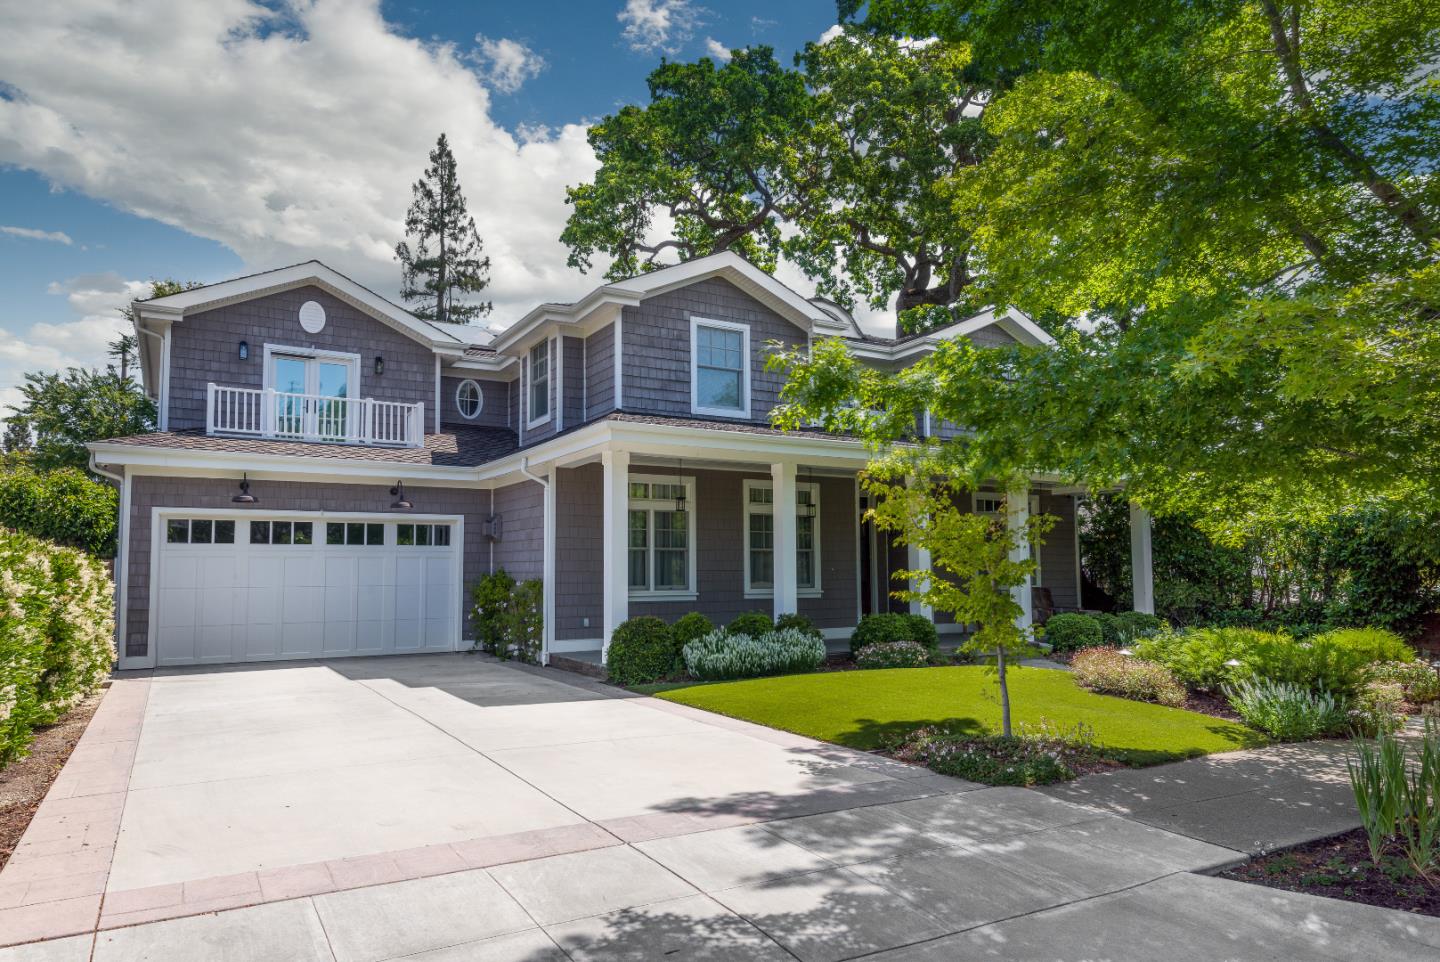 Built in 2016 and located in the beautiful tree-lined Mt Carmel neighborhood, on the border of Edgewood Park area, this light-filled Hampton's style home features expansive interior space, plus a detached workshop studio situated on the flat lot. The property has high end appliances including a gas Wolf Range, Miele full size refrigerator and separate freezer, and steam oven. The kitchen has a massive island with an eat in nook perfect for casual dining and looks out over the thoughtfully landscaped backyard. There is also a formal dining area with an adjacent climate controlled wine cellar for 700+ bottles. Au-pair or in law suite downstairs off the kitchen area offers privacy and separate exterior access through the mudroom. Upstairs features 5 bedrooms, plus a possible 6th bedroom plus a yoga/storage room and the separate laundry room. Property is close to parks and the highly rated public magnet school North Star Academy (grades 3-8). Shown by appointment only.